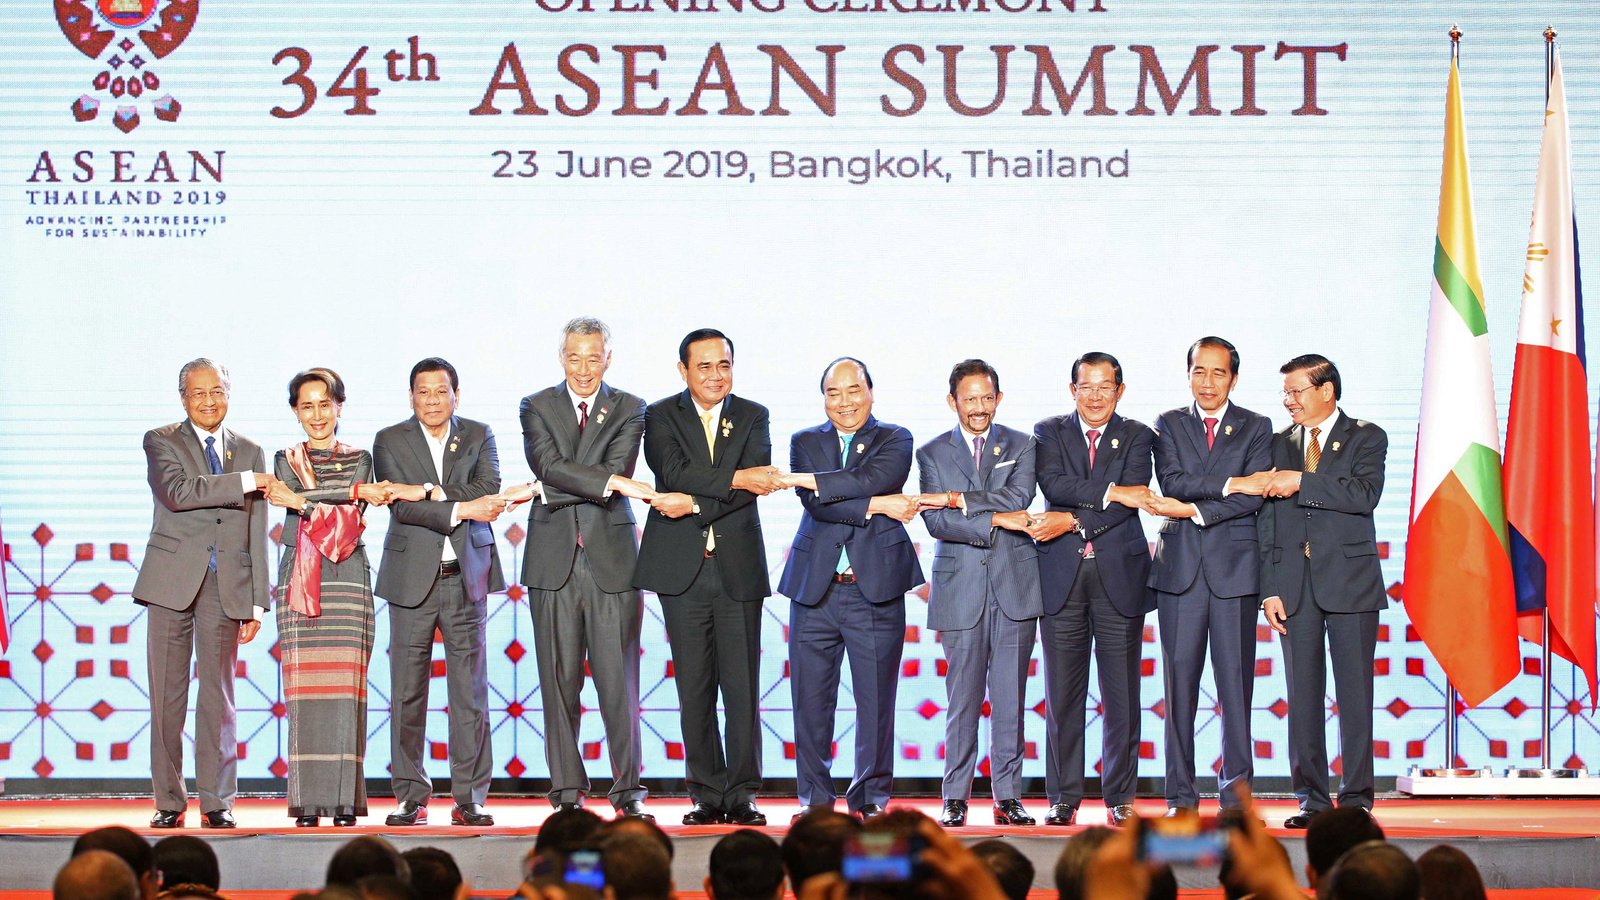 Making Sense Of The Asean Summit Council On Foreign Relations